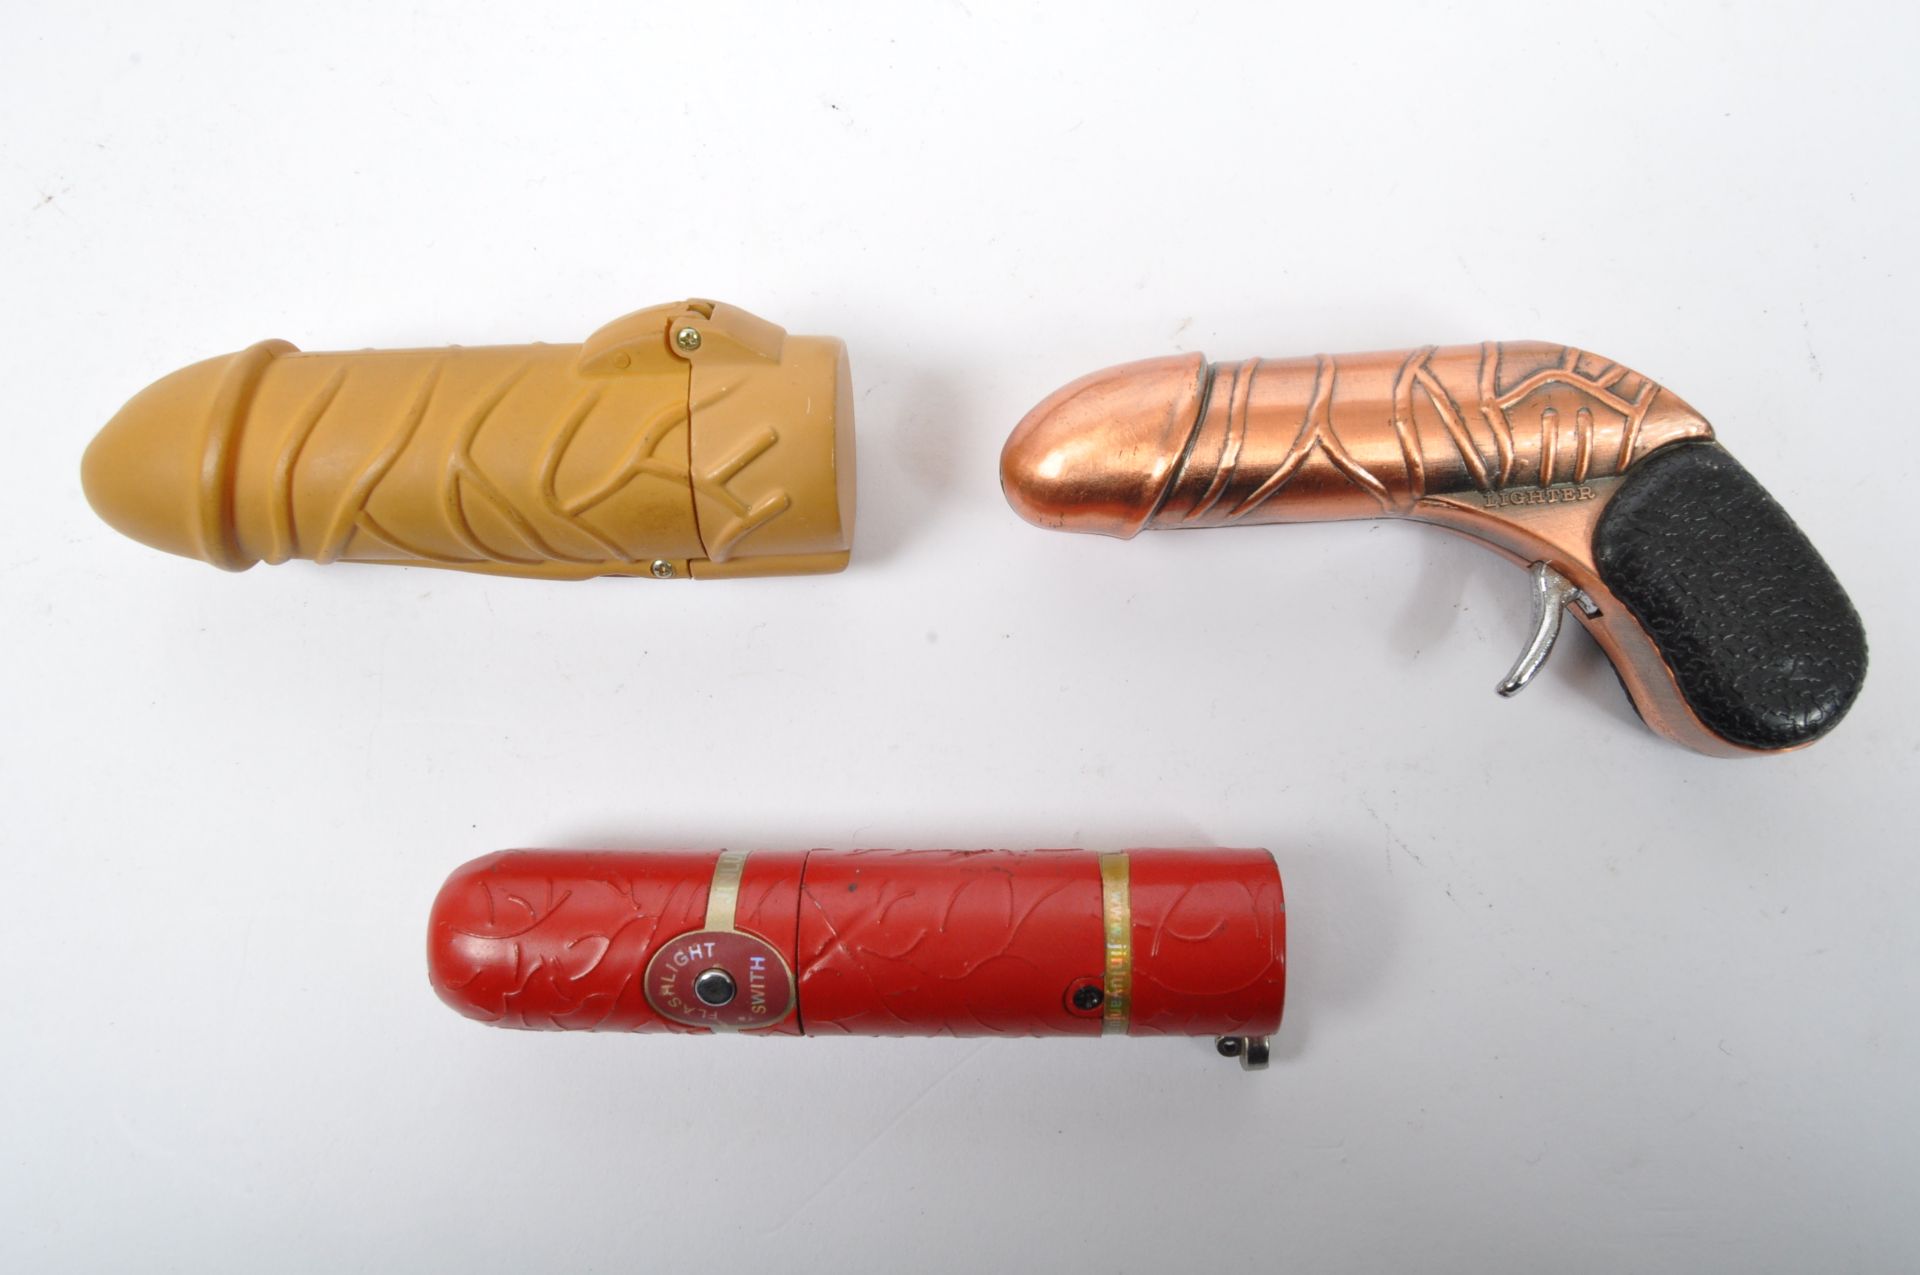 ASSORTMENT OF VINTAGE NOVELTY EROTIC THEMED LIGHTERS - Image 3 of 5